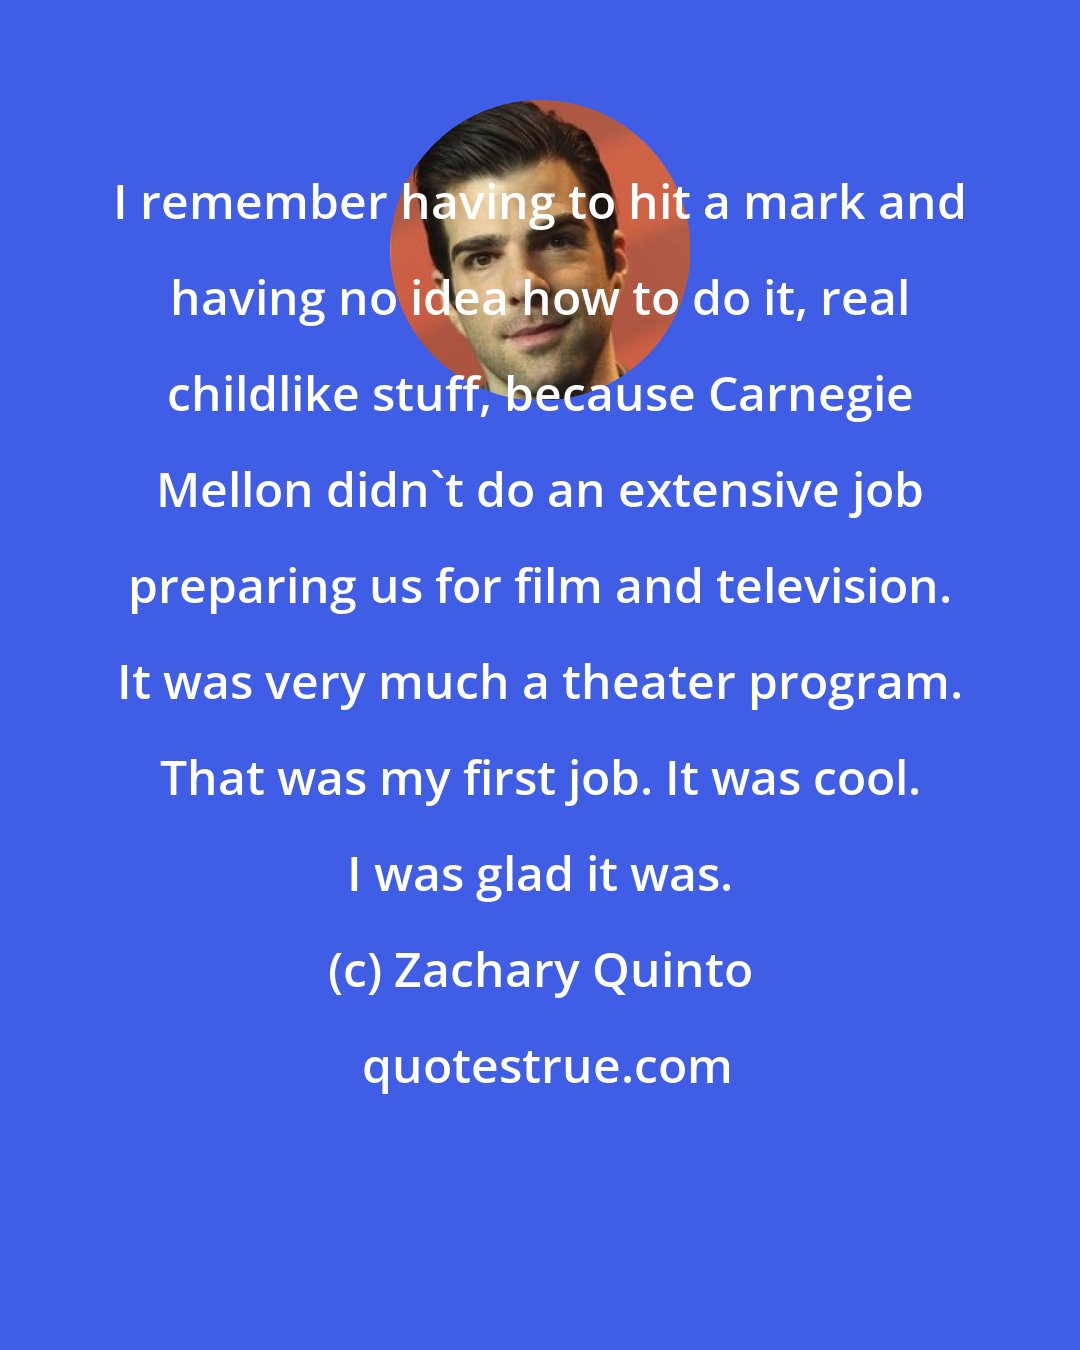 Zachary Quinto: I remember having to hit a mark and having no idea how to do it, real childlike stuff, because Carnegie Mellon didn't do an extensive job preparing us for film and television. It was very much a theater program. That was my first job. It was cool. I was glad it was.